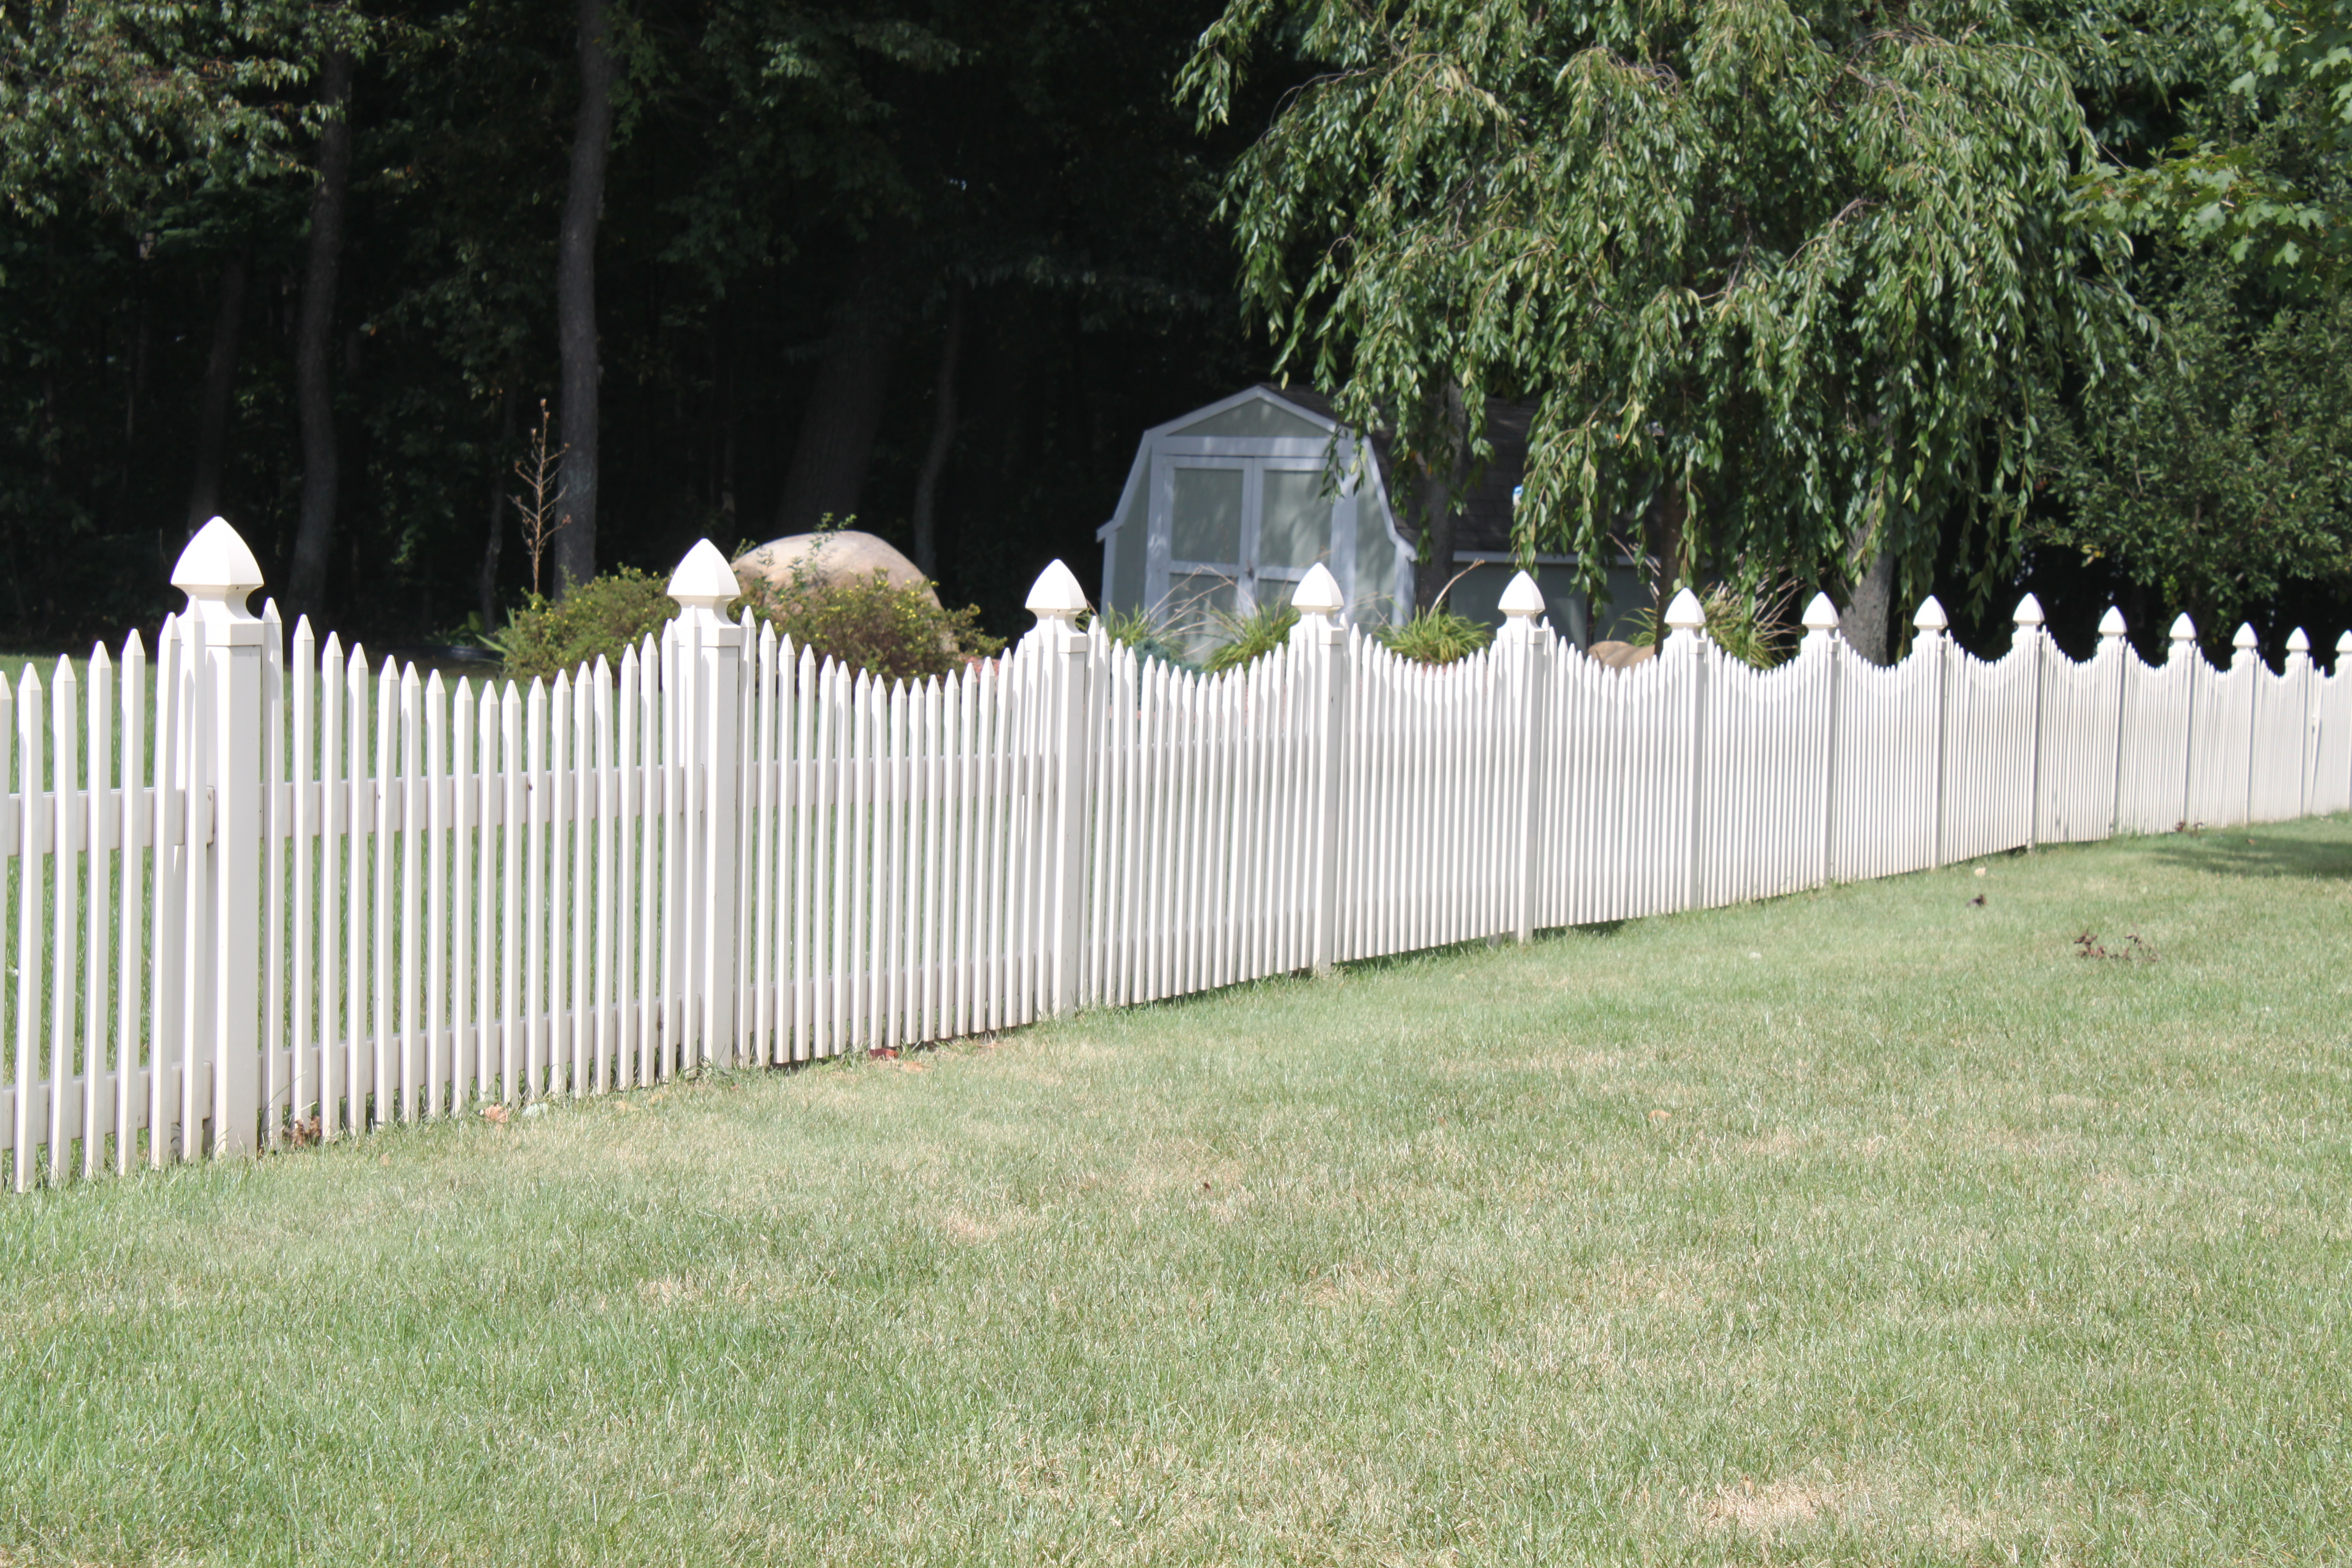 Picket Fence Vinyl Fence In A Variety Of Colors And Styles for dimensions 4752 X 3168